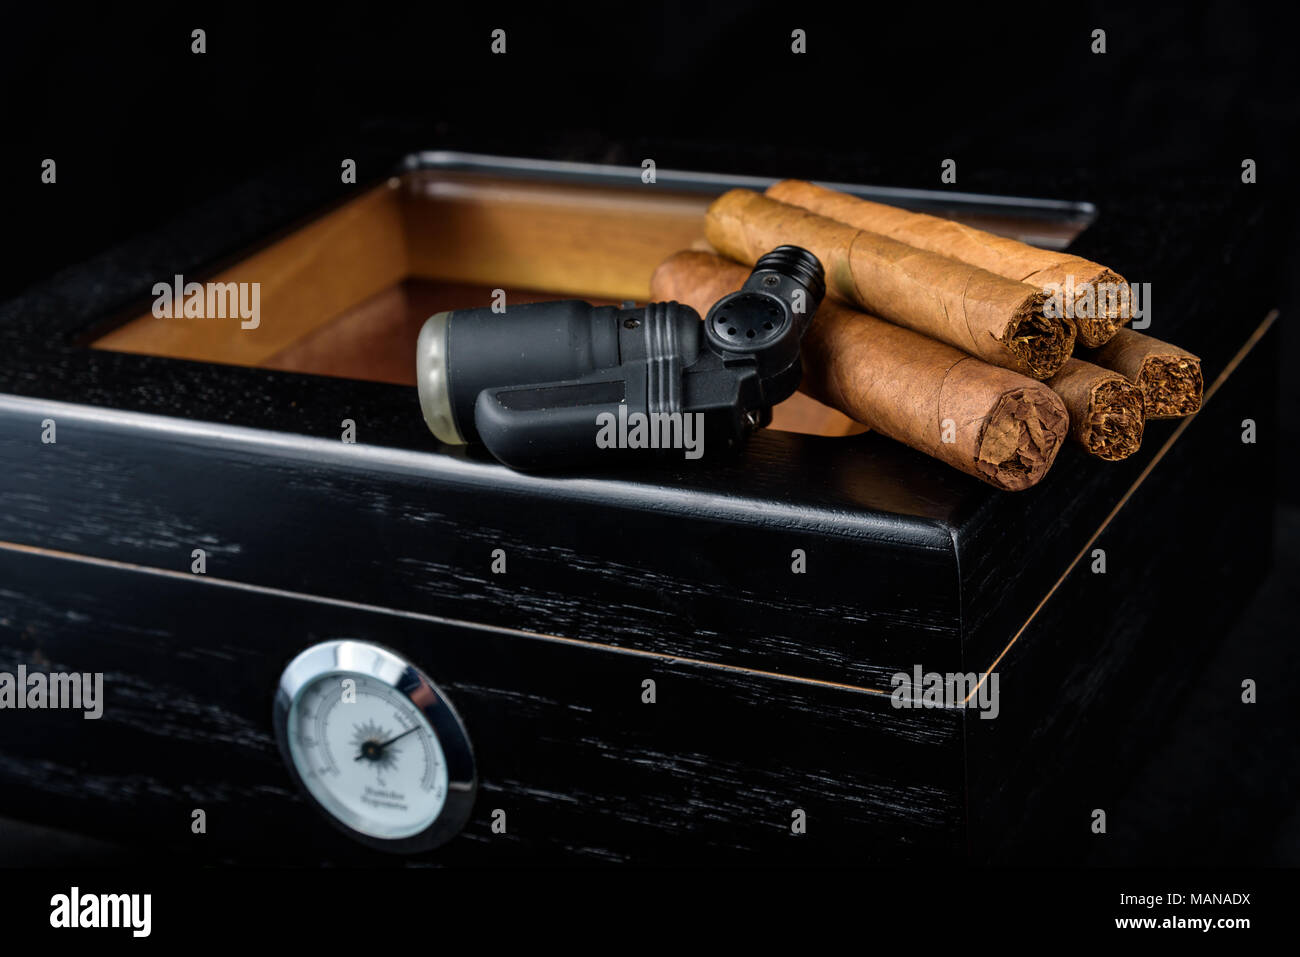 a black butane torch and a pile of fresh cigars above a black humidor. Black background Stock Photo